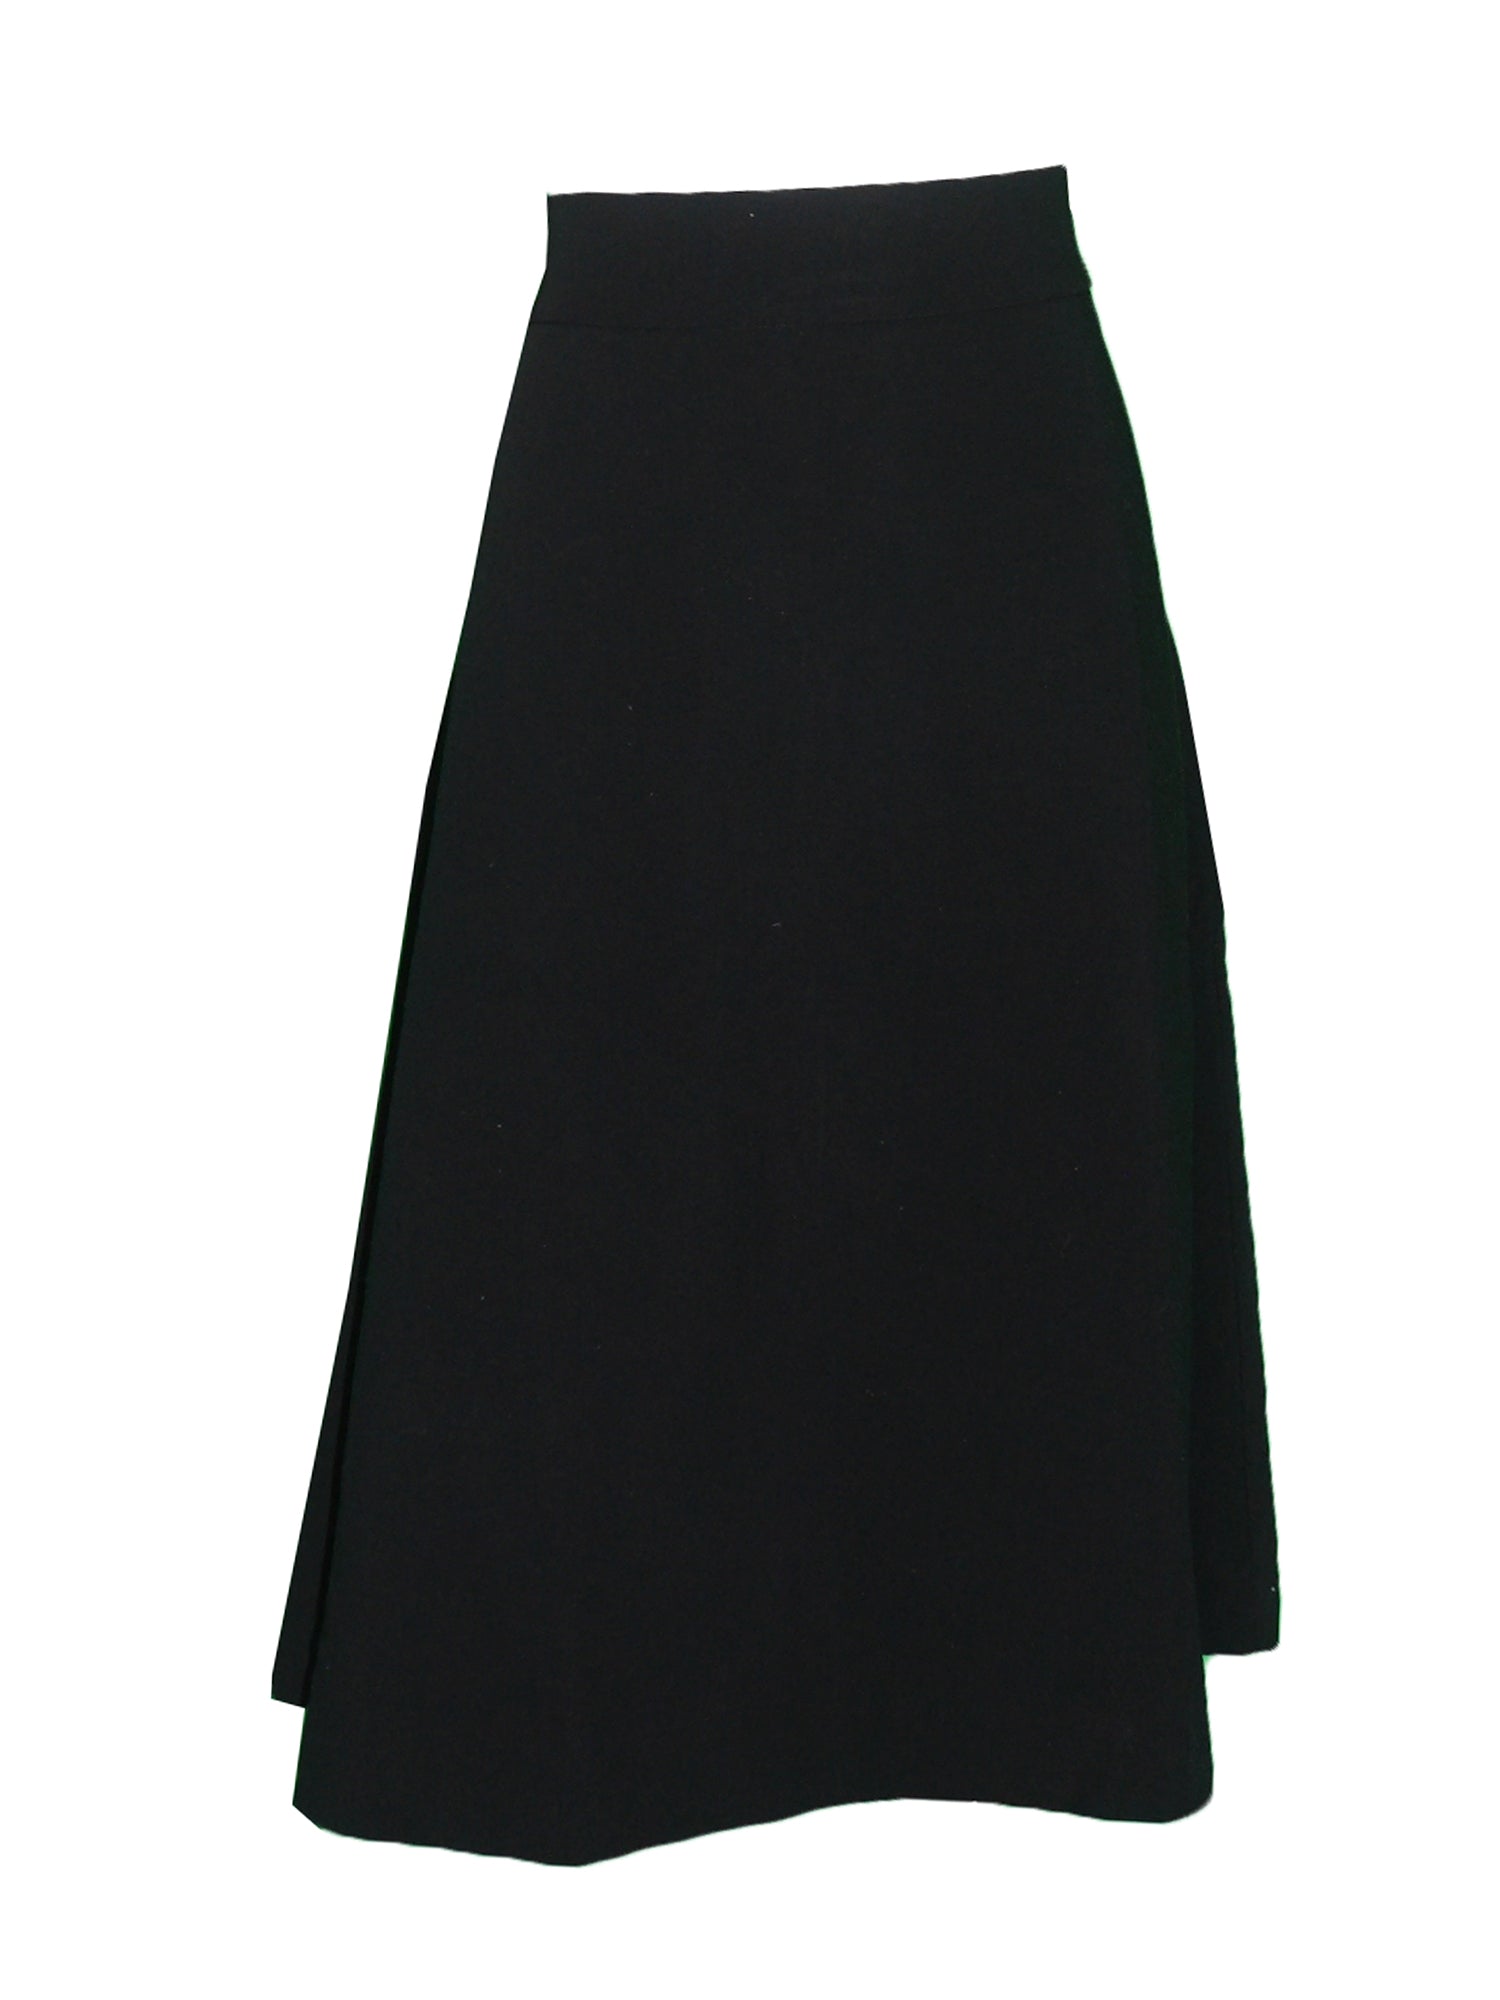 Wear and Flair Pure Line A-Line Skirt - Skirts